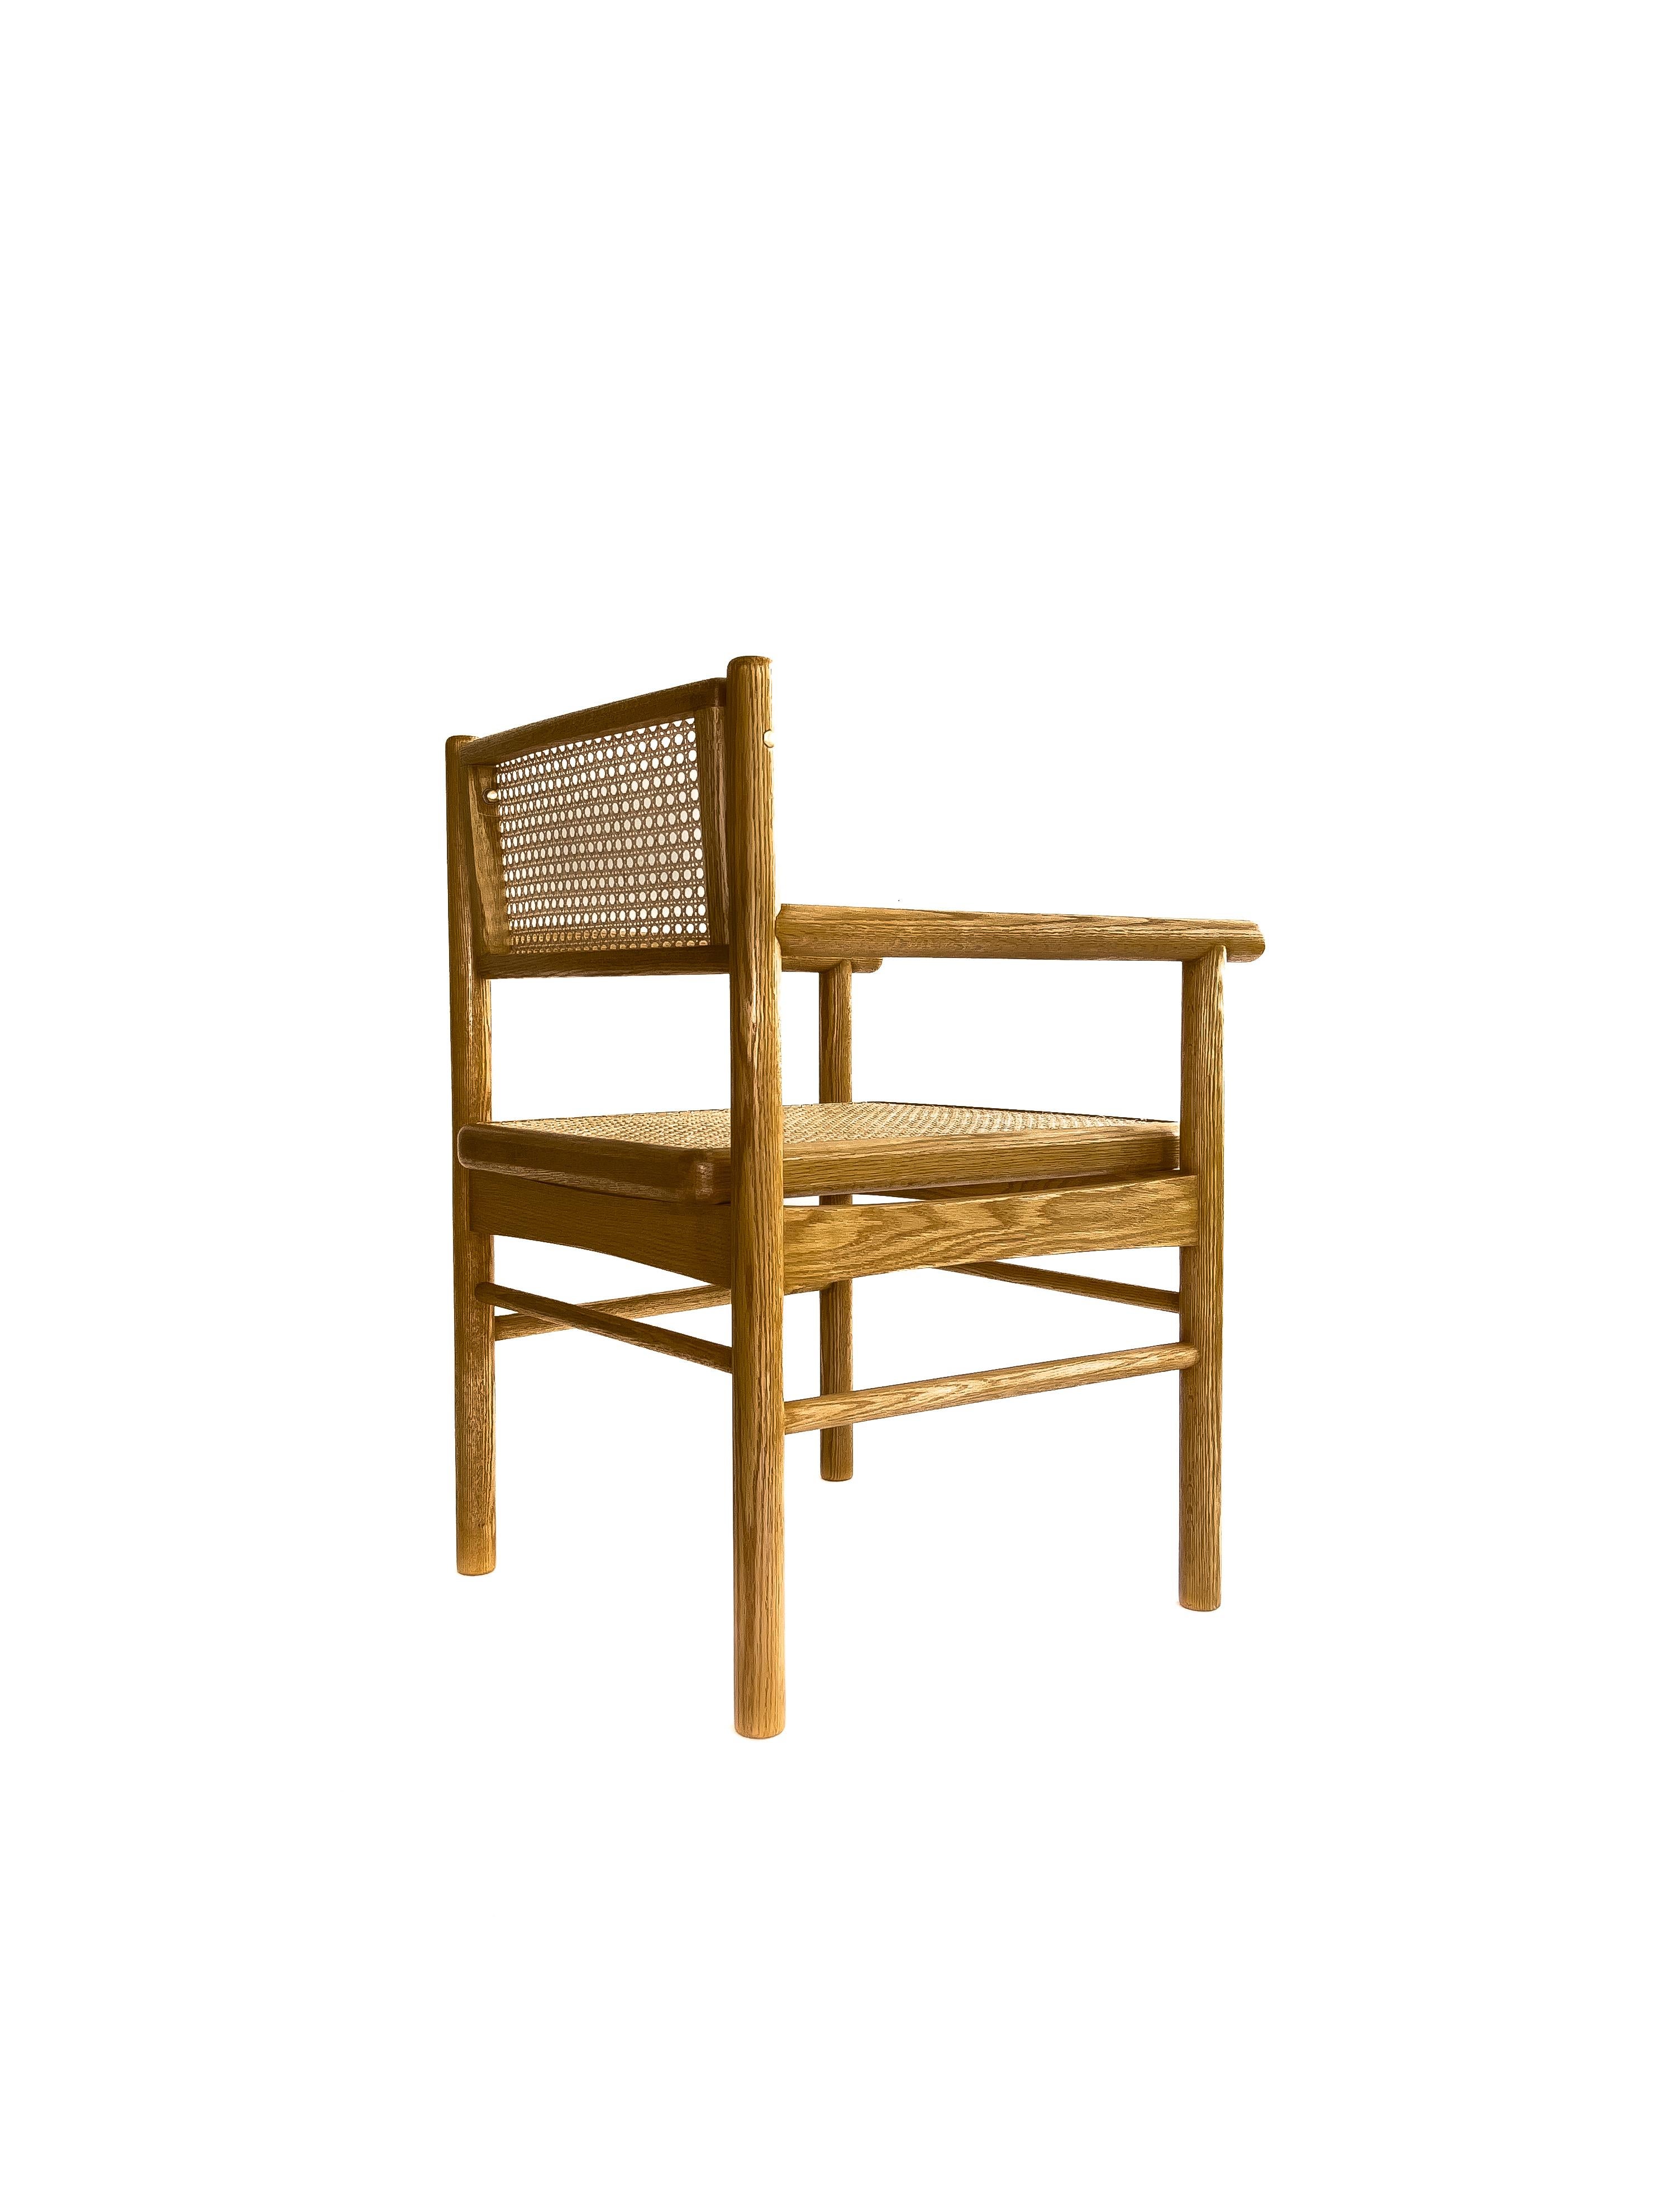 Minimalist Mr. Cane,  hand canned wicker dining armchair with a self adjustable swivel back For Sale